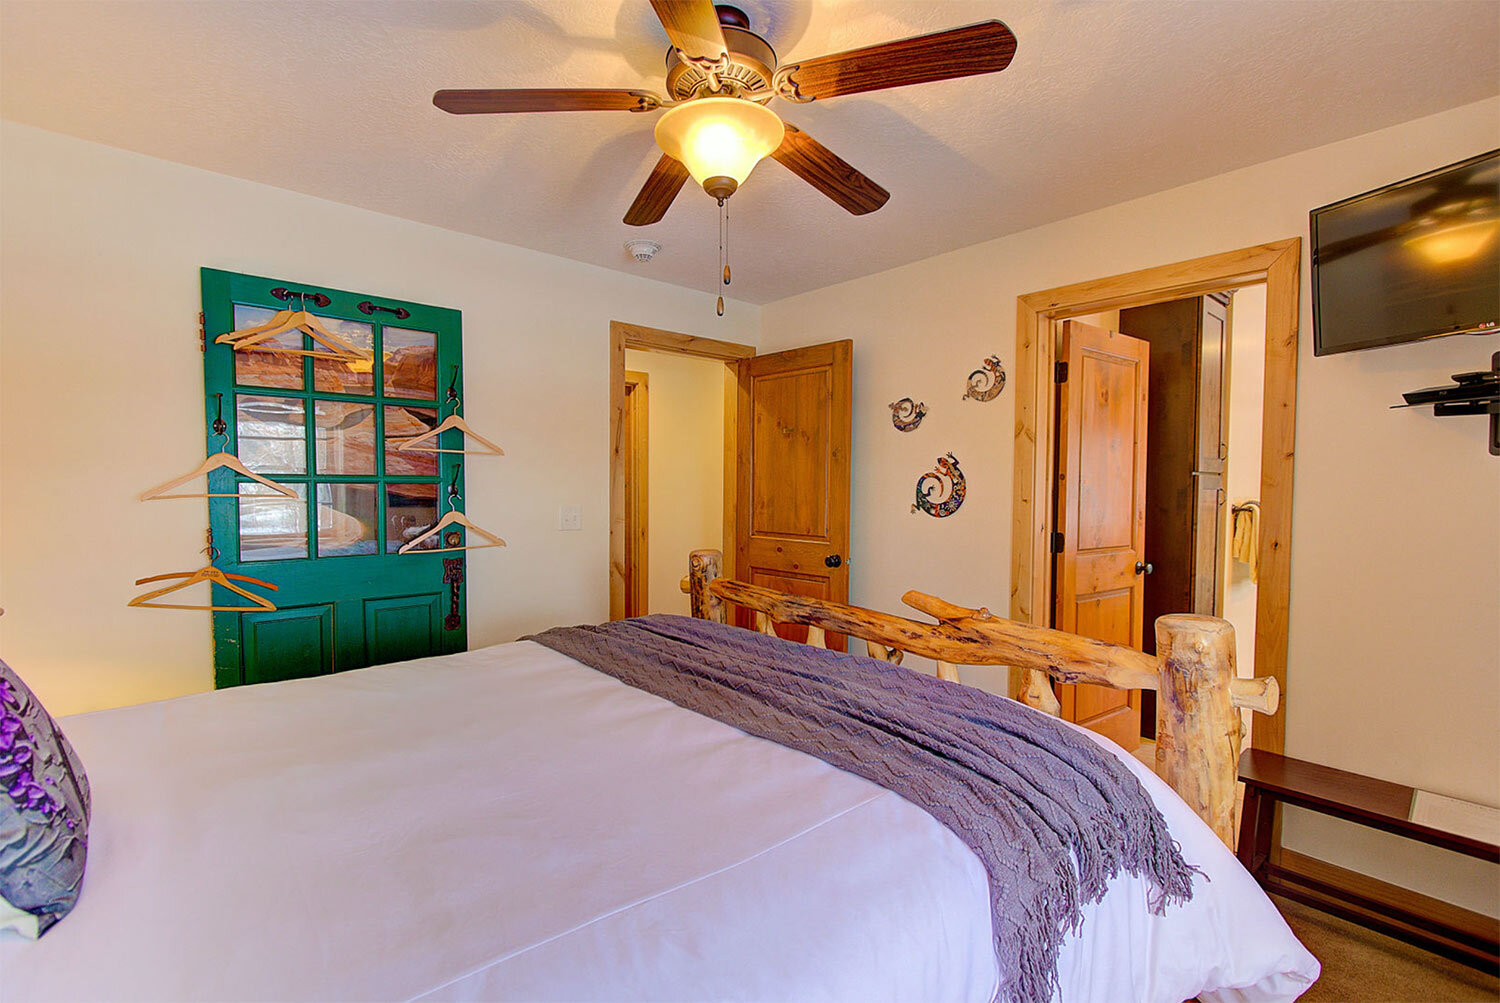 Engen Hus Bed and Breakfast - airbnb salt lake city monthly